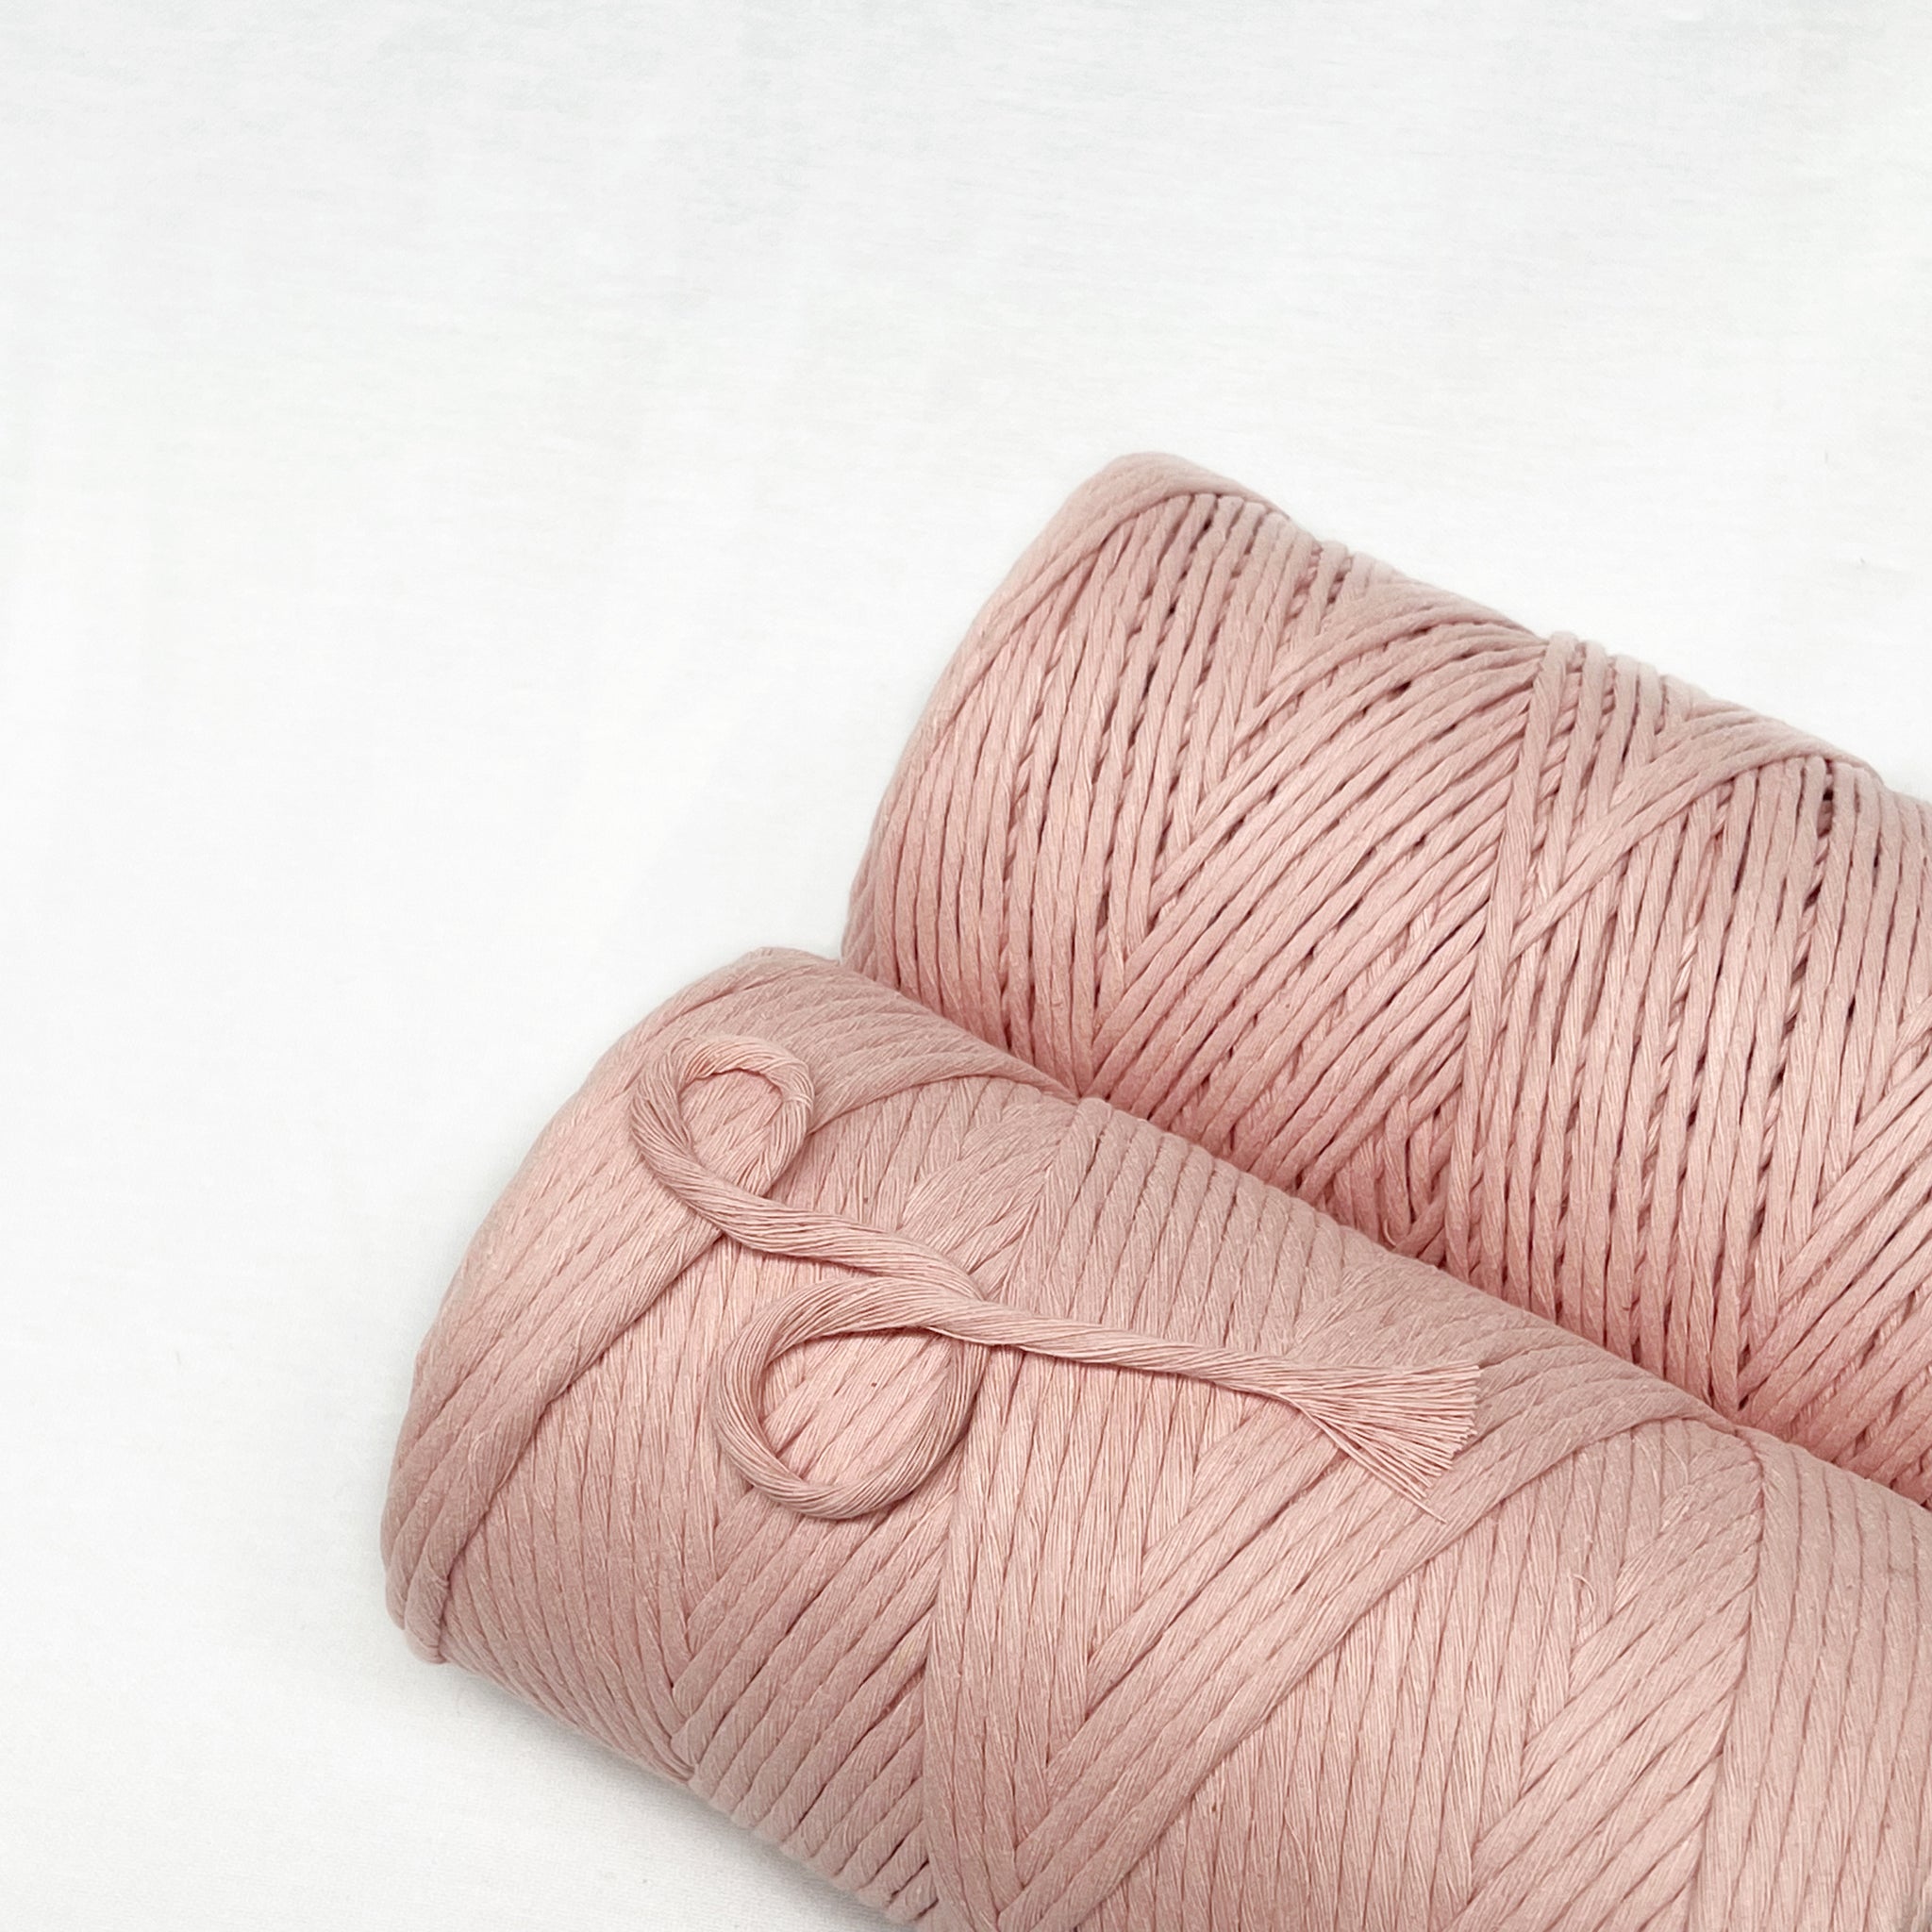 Recycled Luxe Macrame String // Powder Pink - Mary Maker Studio - Macrame &  Weaving Supplies and Education.